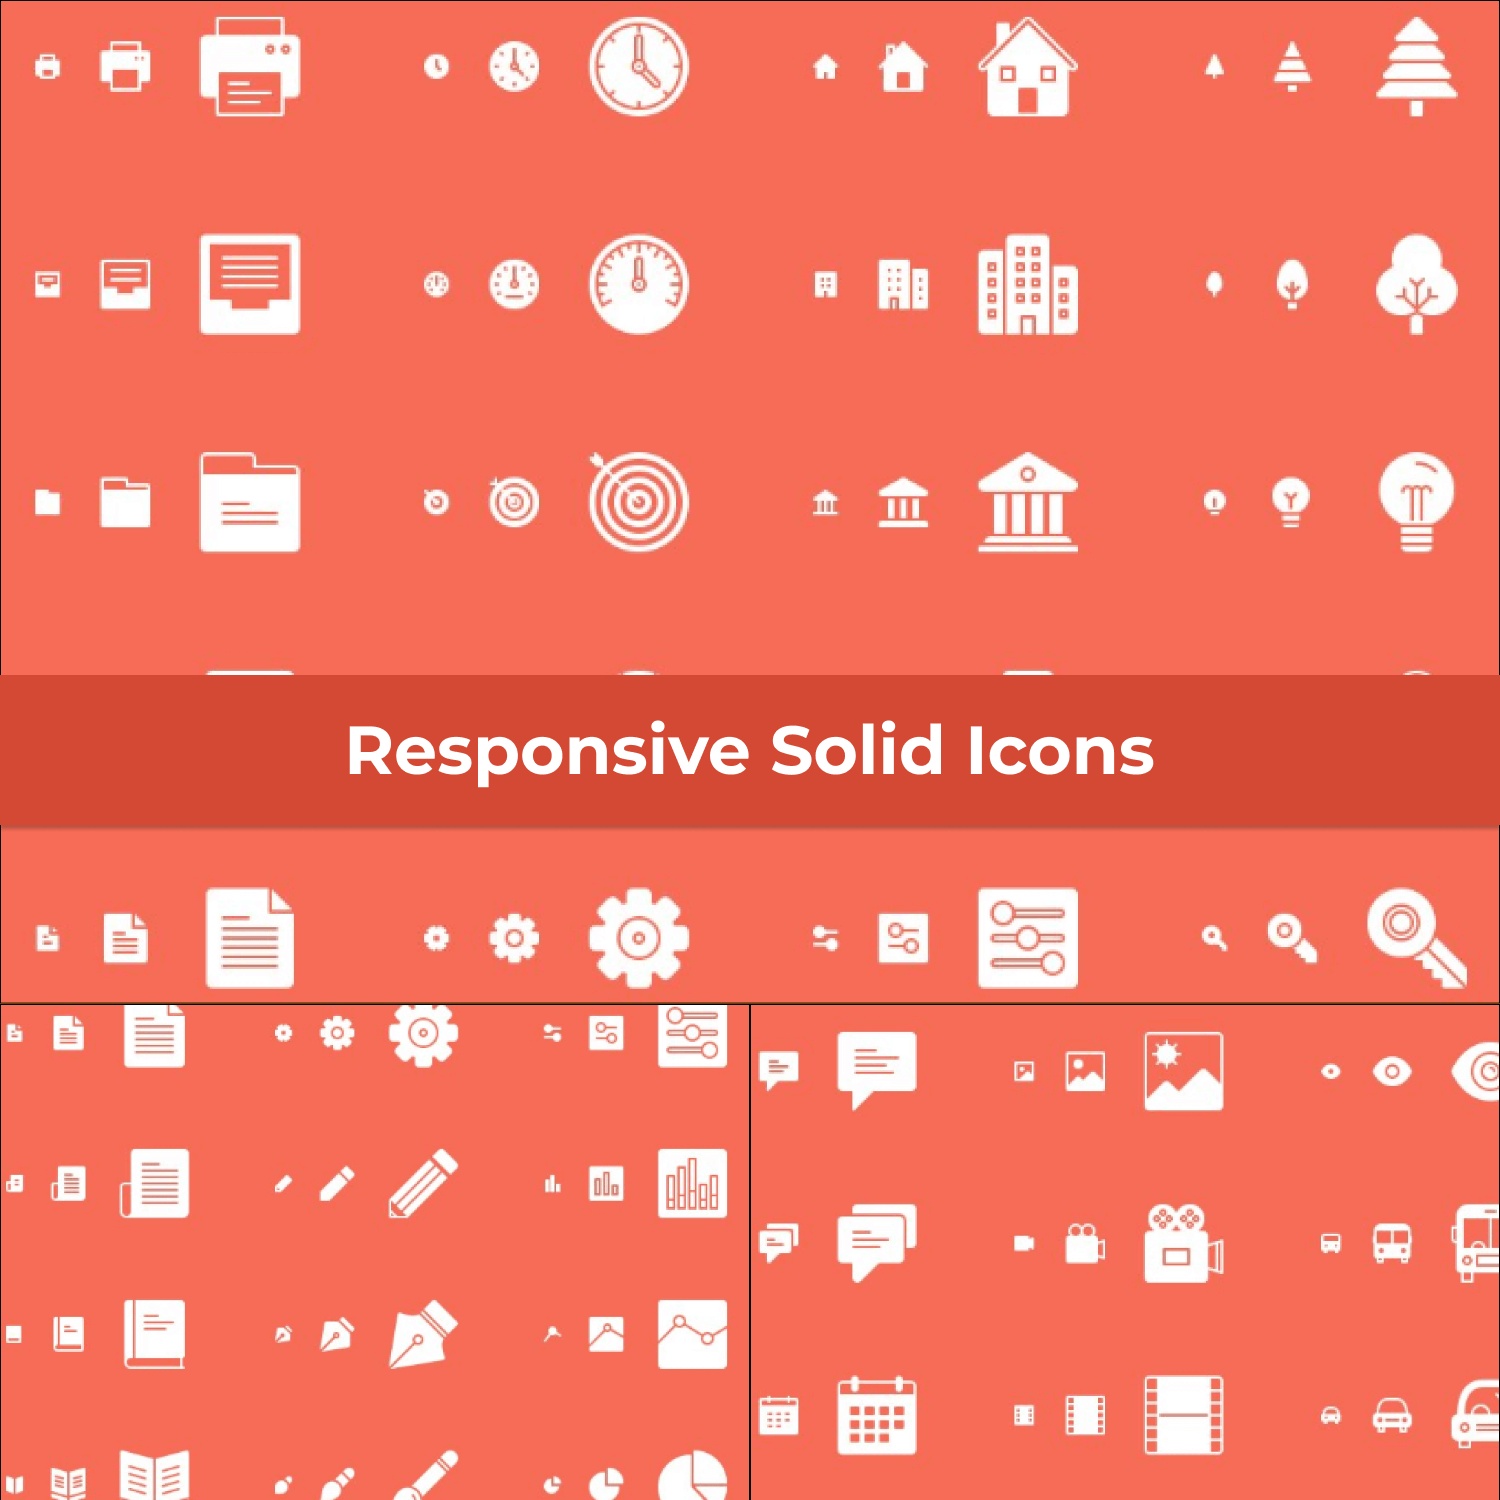 Responsive Solid Icons main cover.